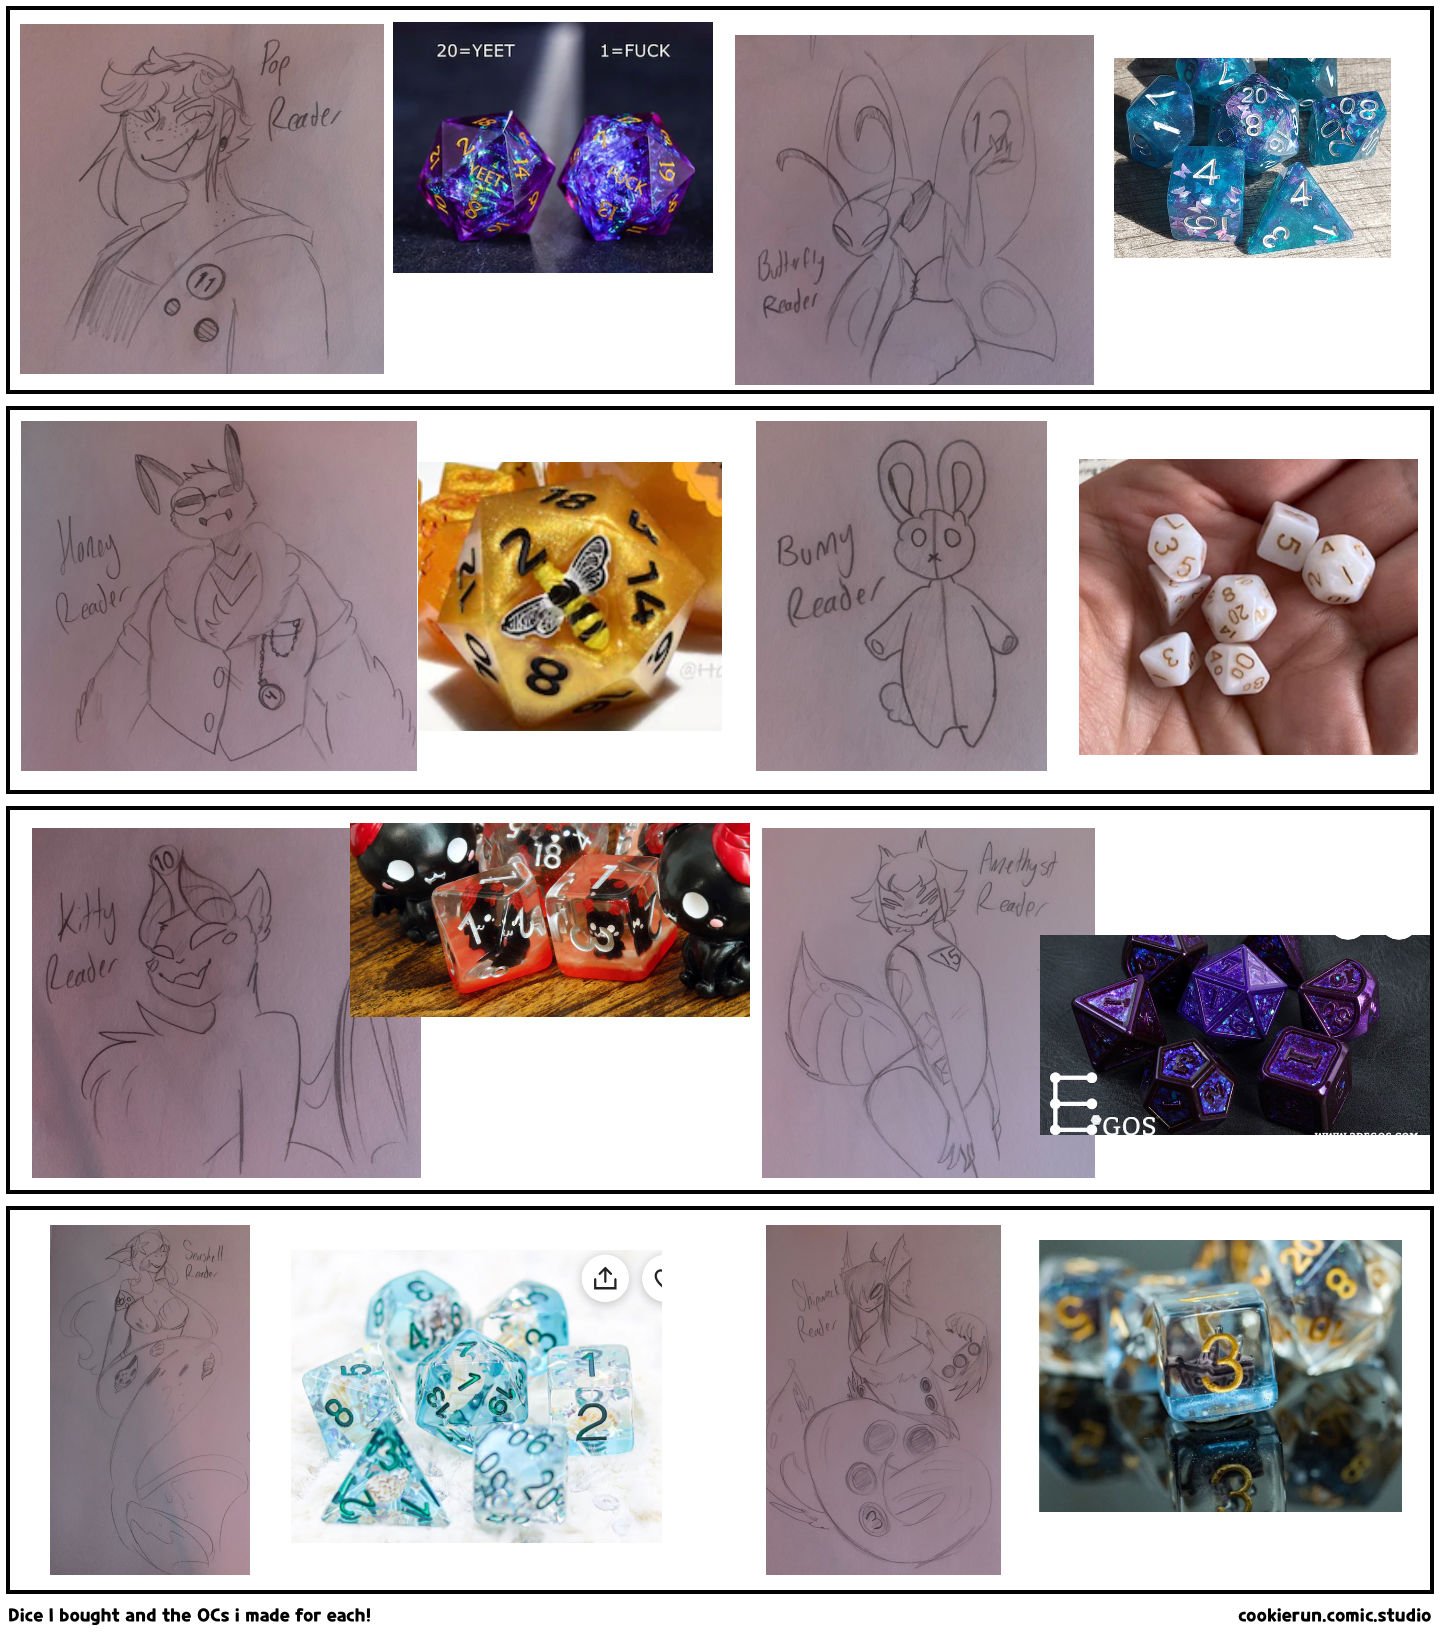 Dice I bought and the OCs i made for each!